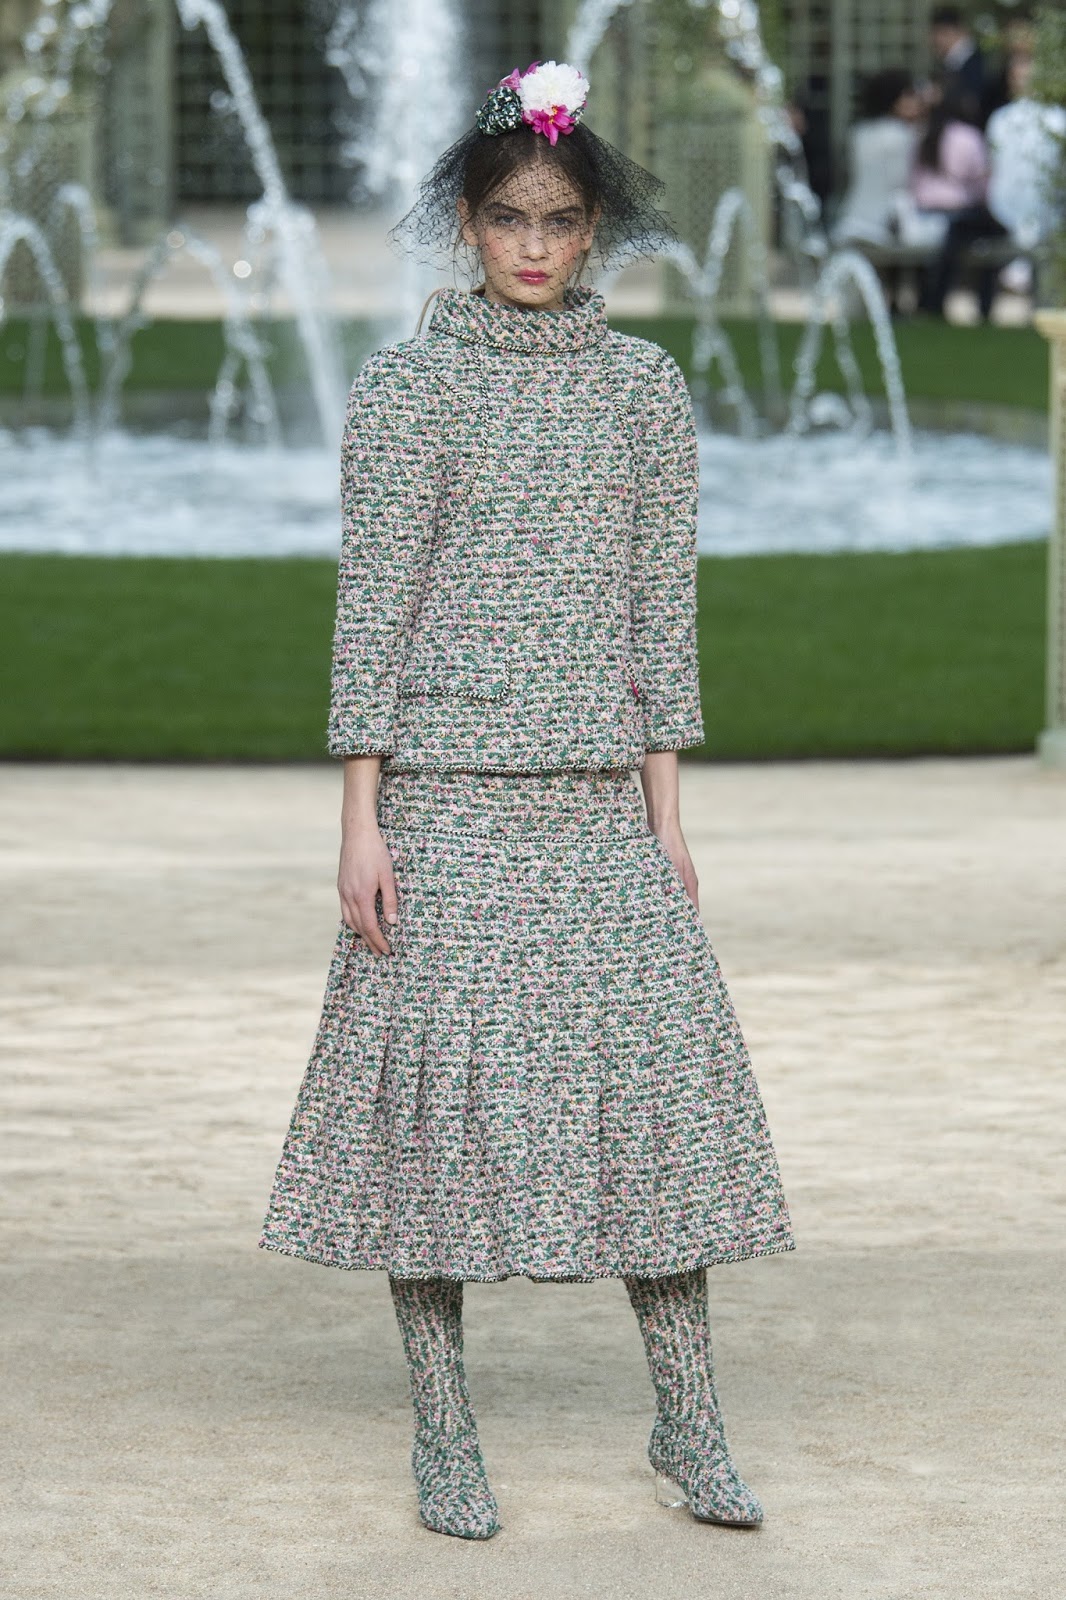 Mom's Turf: Chanel Spring 2018 Couture Collection